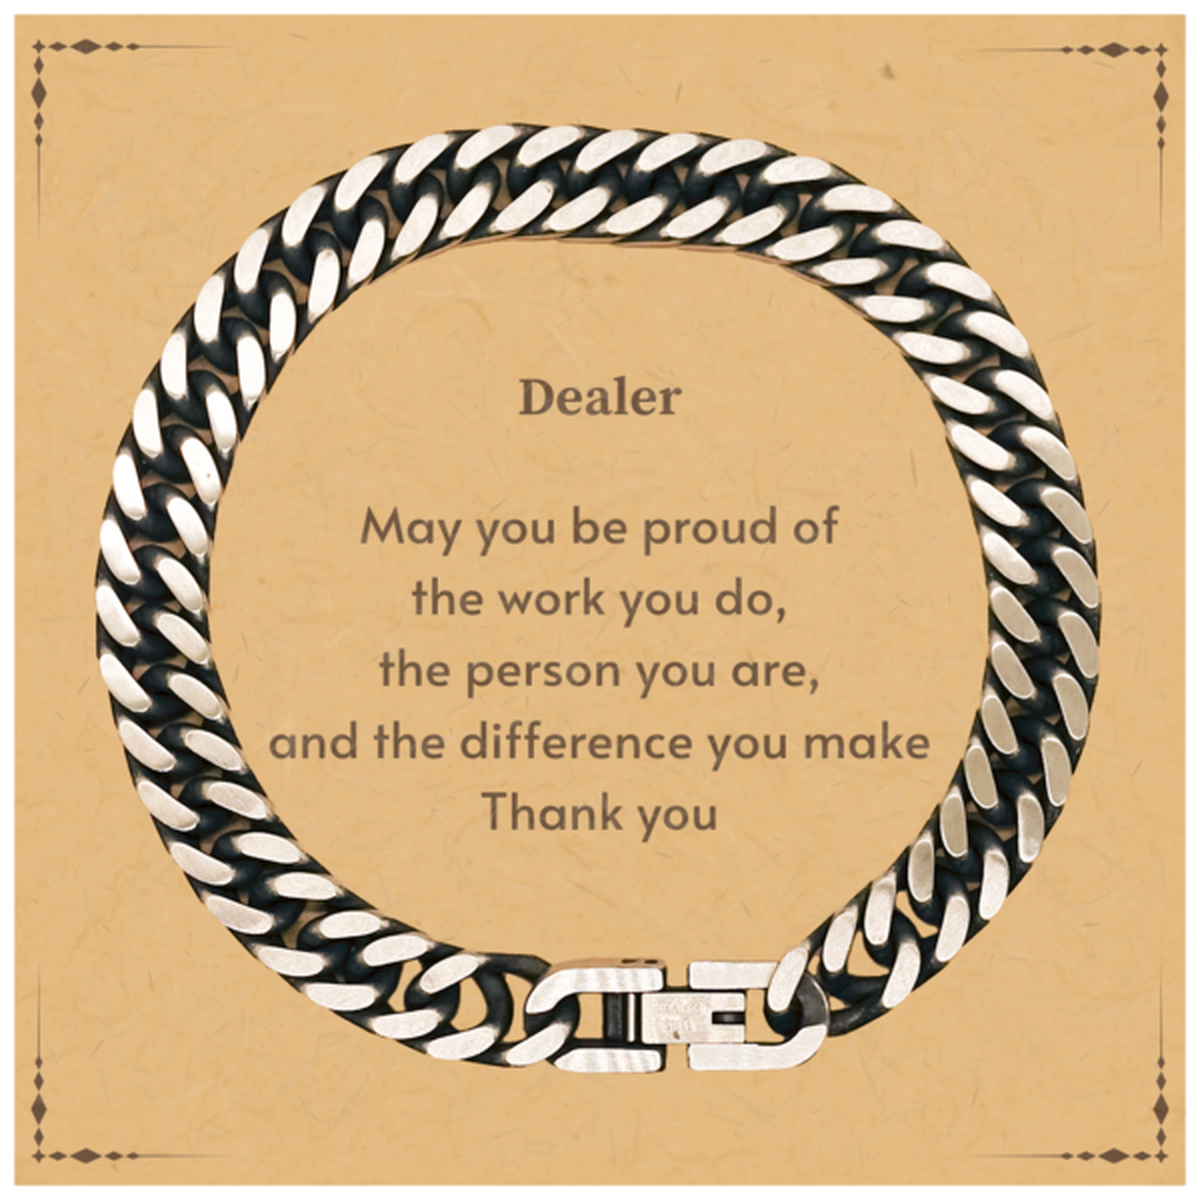 Heartwarming Cuban Link Chain Bracelet Retirement Coworkers Gifts for Dealer, Dealer May You be proud of the work you do, the person you are Gifts for Boss Men Women Friends